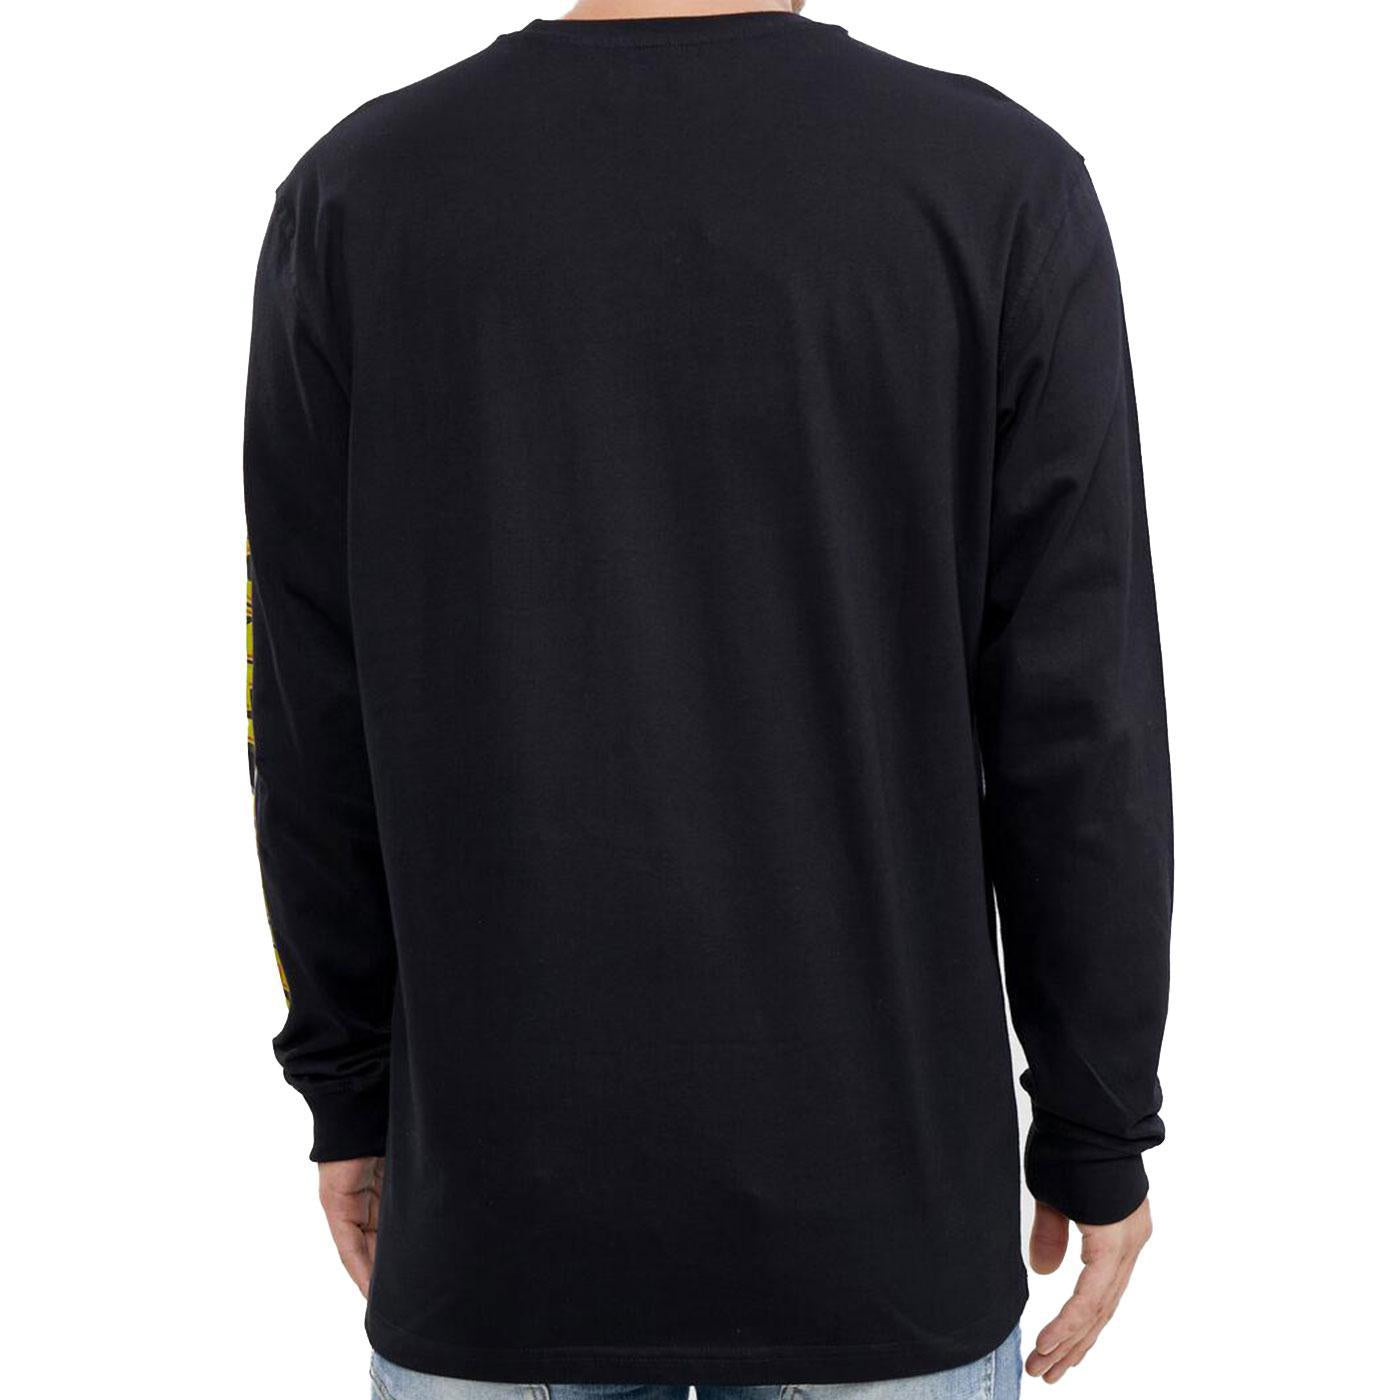 That's All Folks! Long Sleeve Tee (Black) Rear | Freeze Max